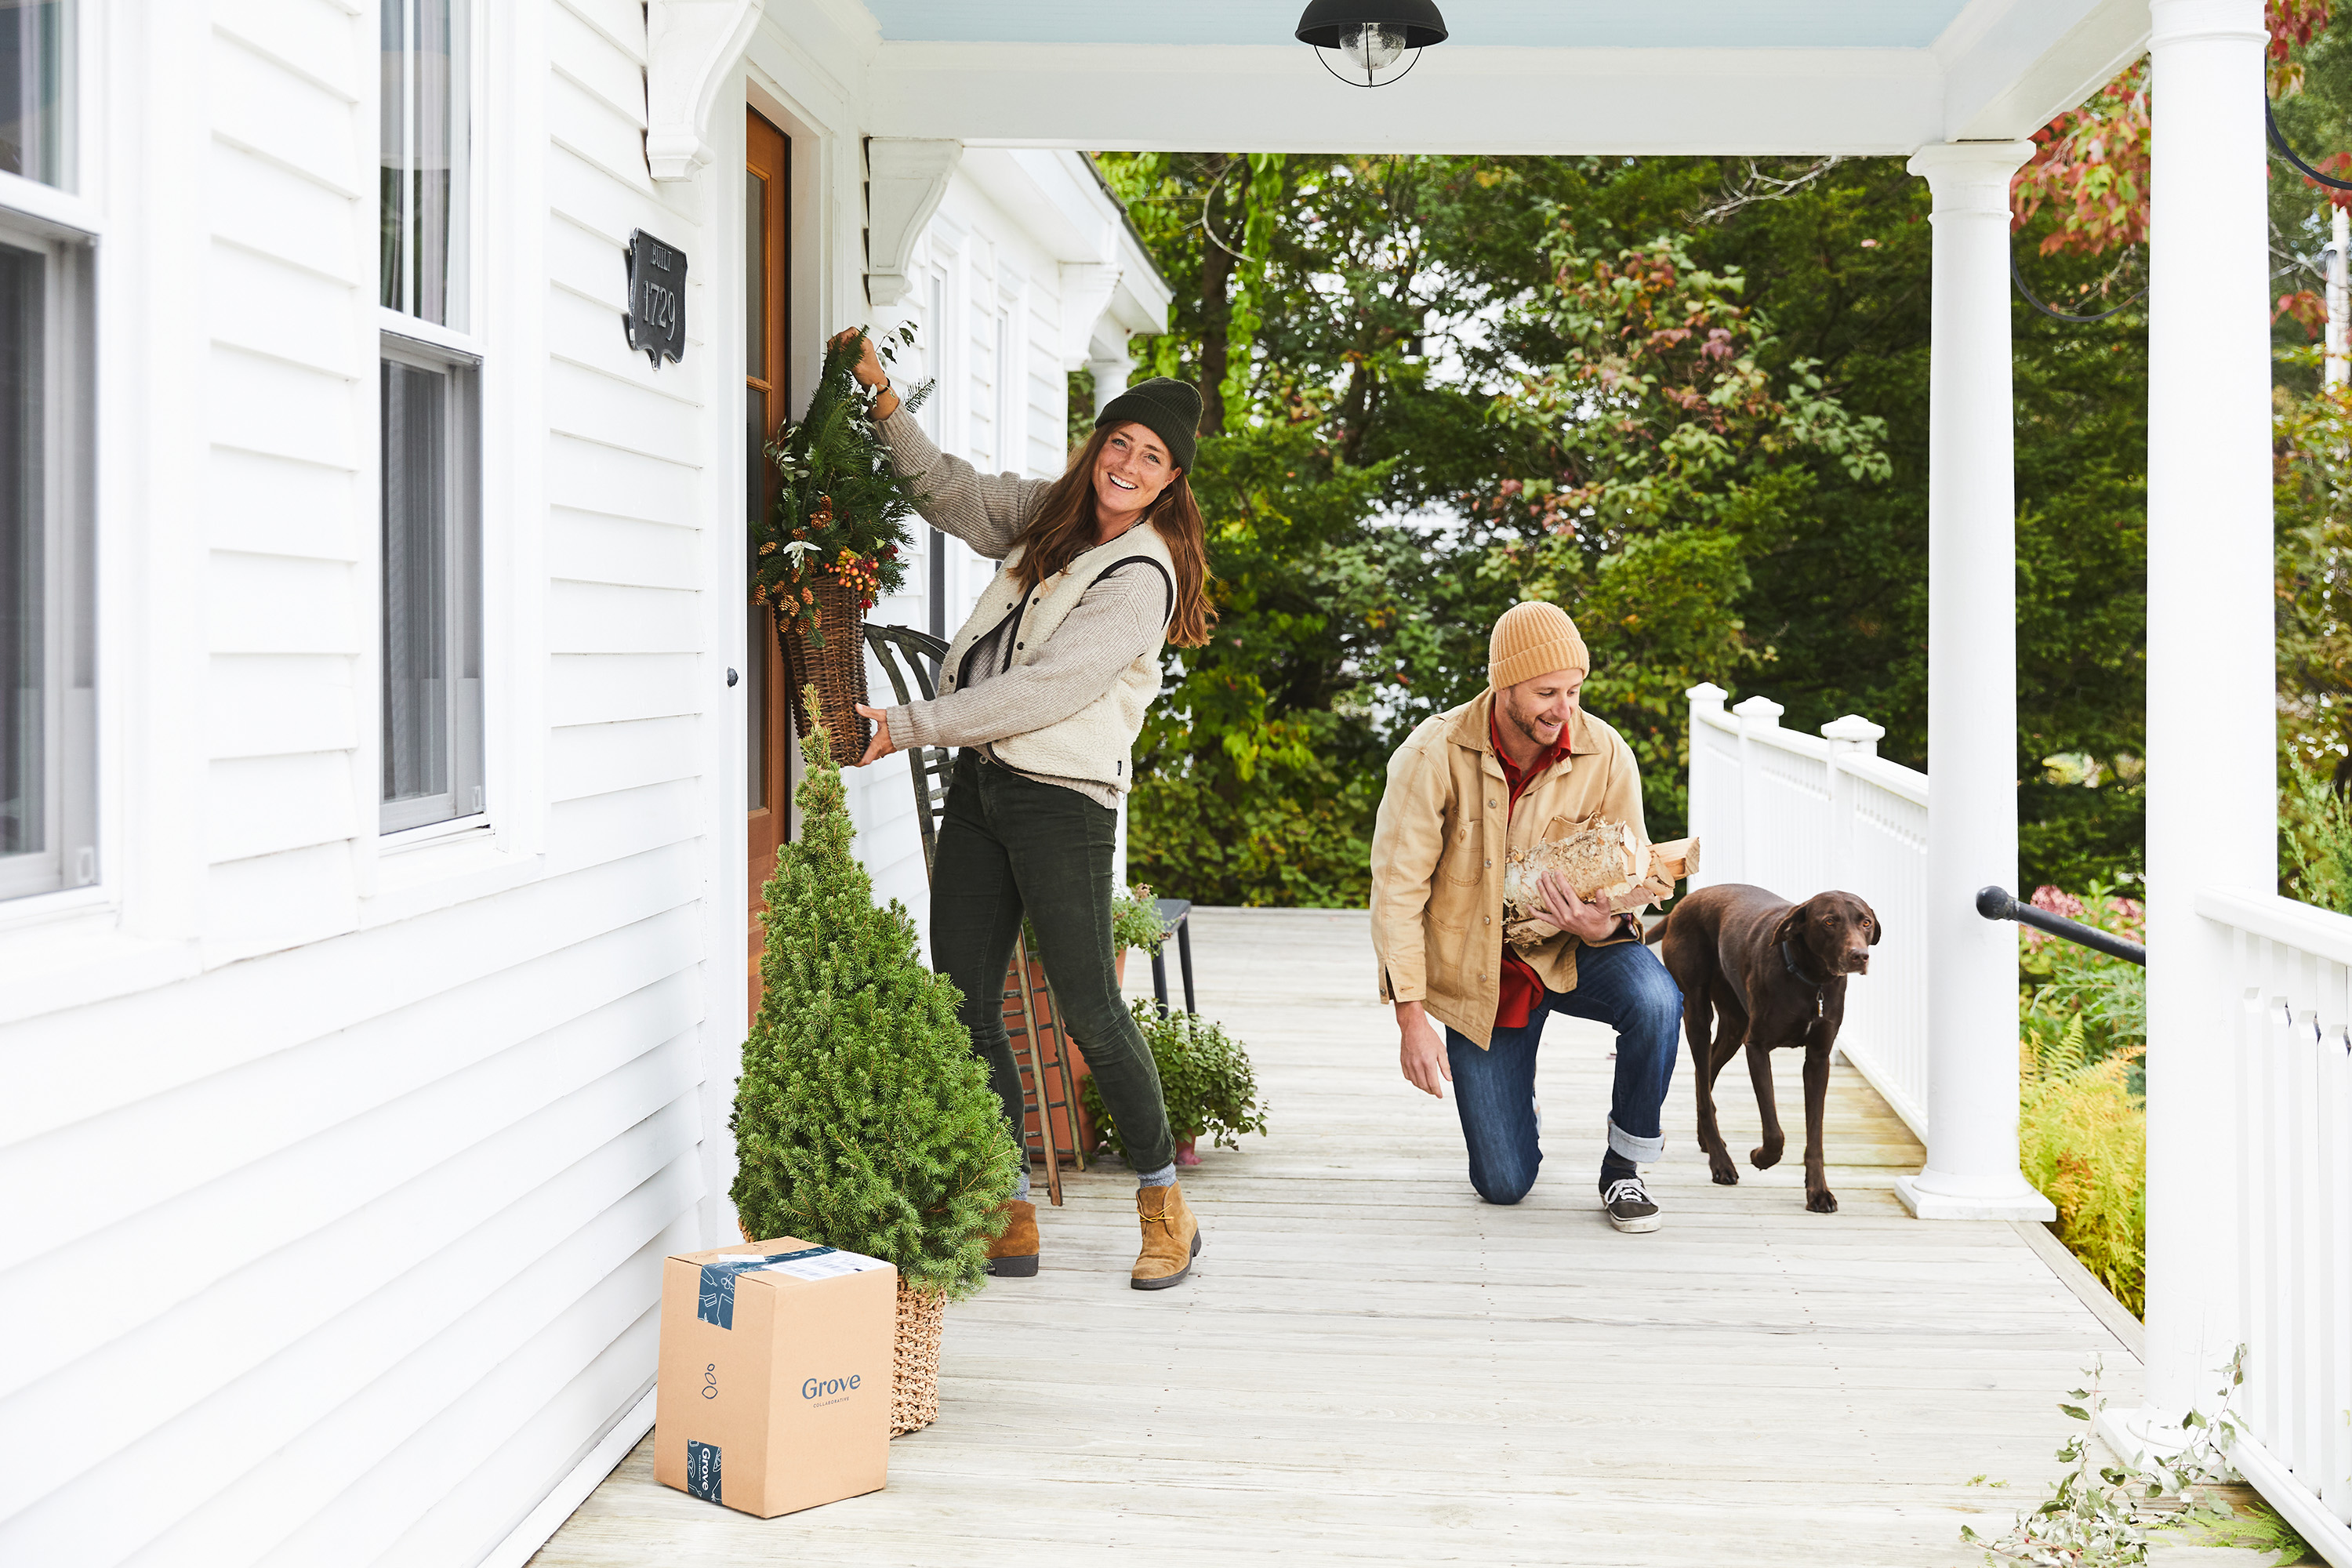 Image of woman hanging wreath on front door while man kneels next to brown dog on front porch